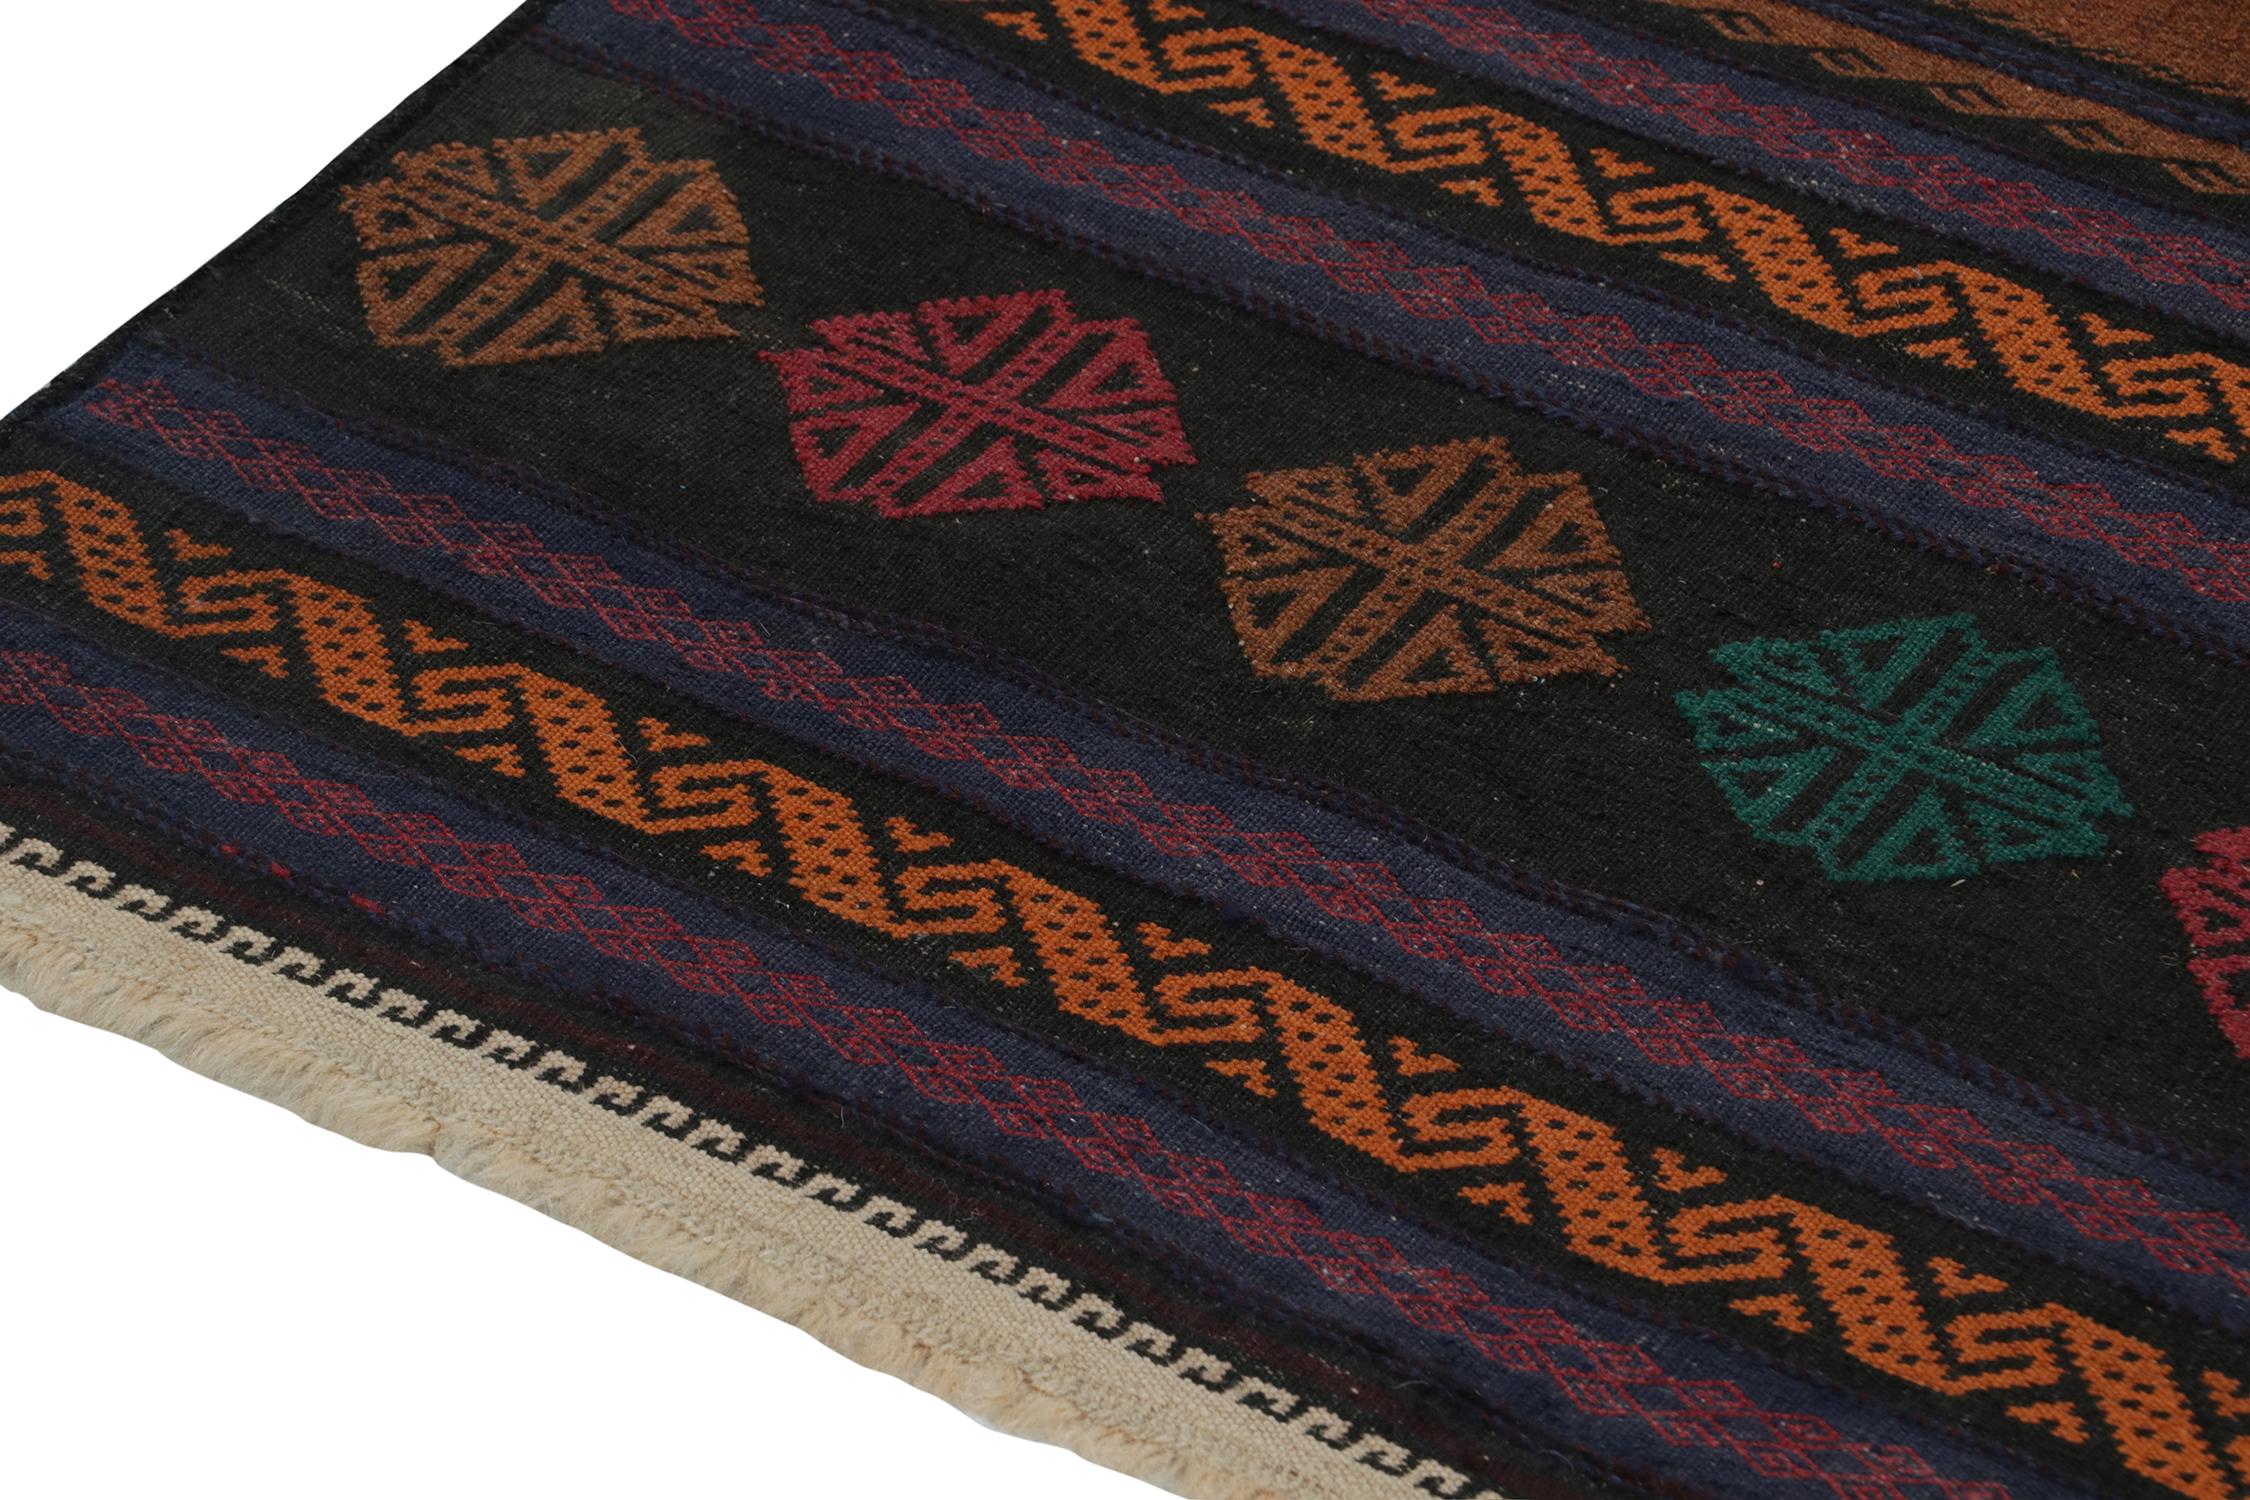 Vintage Persian Kilim Runner in Polychromatic Geometric Patterns by Rug & Kilim In Good Condition For Sale In Long Island City, NY